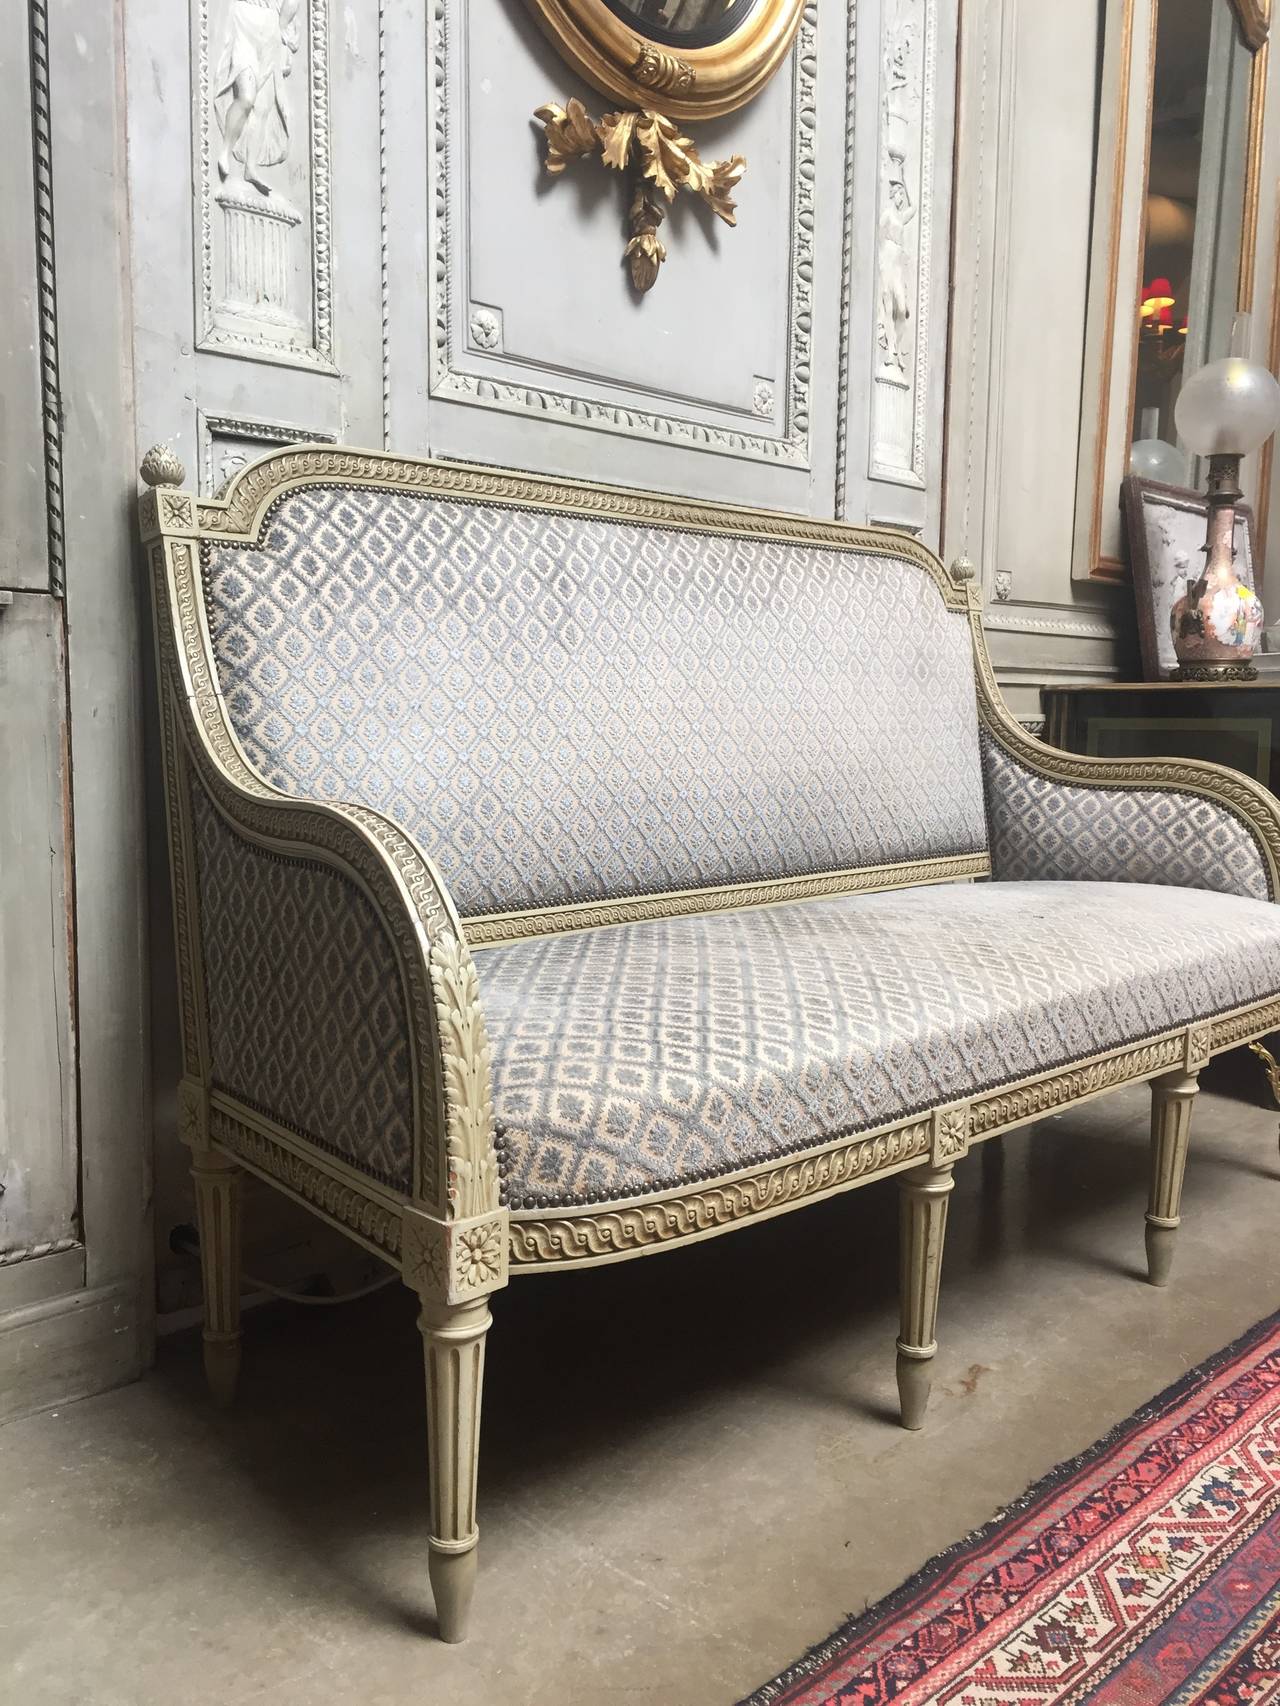 A French Louis XVI style nicely carved canape, sofa with gadrooning, acanthus leaves and acorn finials on fluted legs. This early 20th century sofa is deep and sits higher than most antiques. It has a gray green old painted finish and is ready for